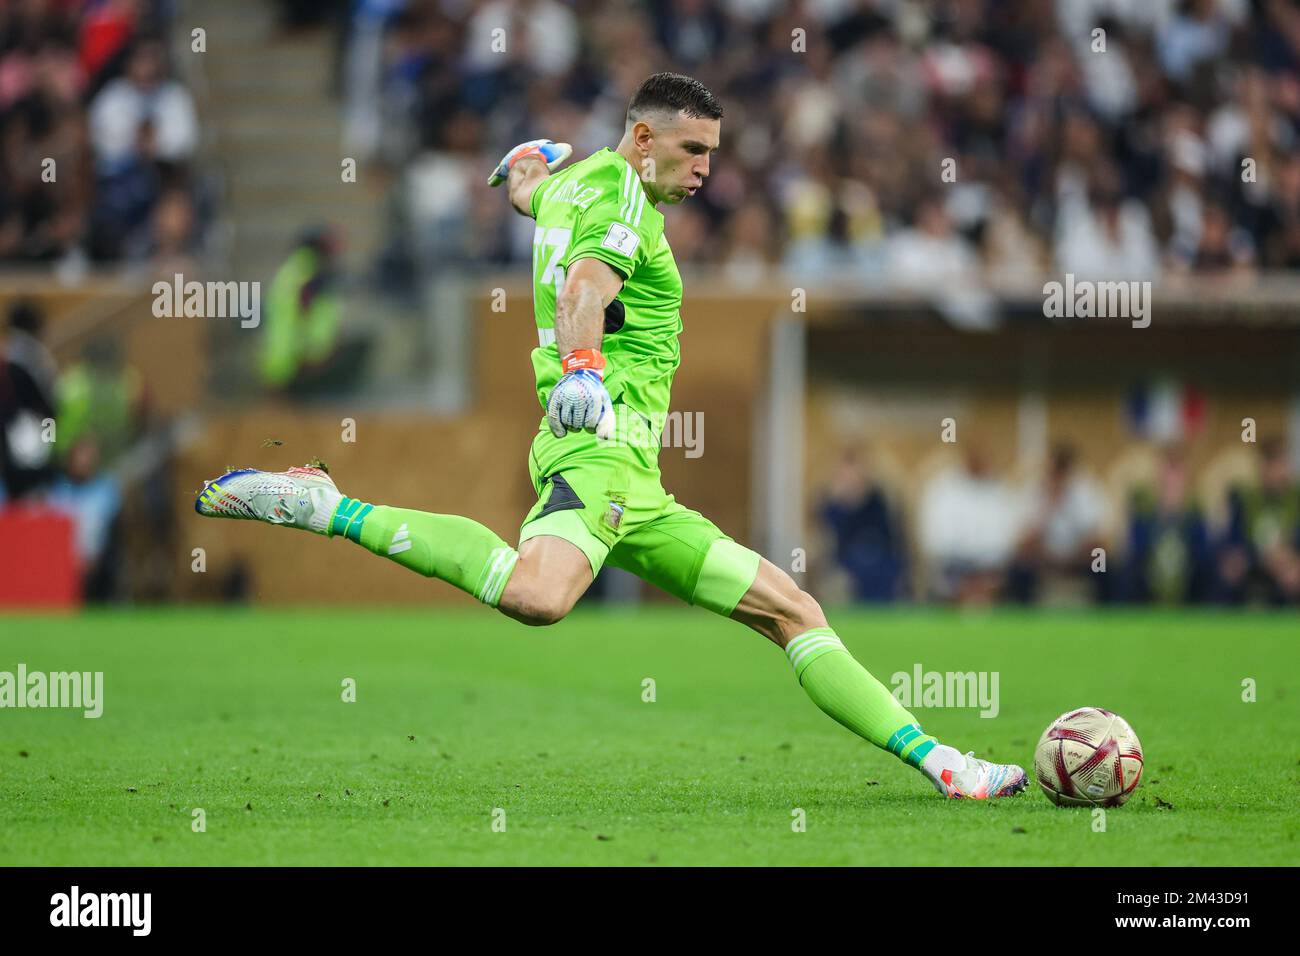 Doha, Qatar. 18th Dec, 2022. Emiliano Martínez Argentina during a match against France valid for the Final World Cup in Qatar at Estadio Lusail in the city of Doha in Qatar. December 18, 2022. (Photo: William Volcov) Credit: Brazil Photo Press/Alamy Live News Stock Photo